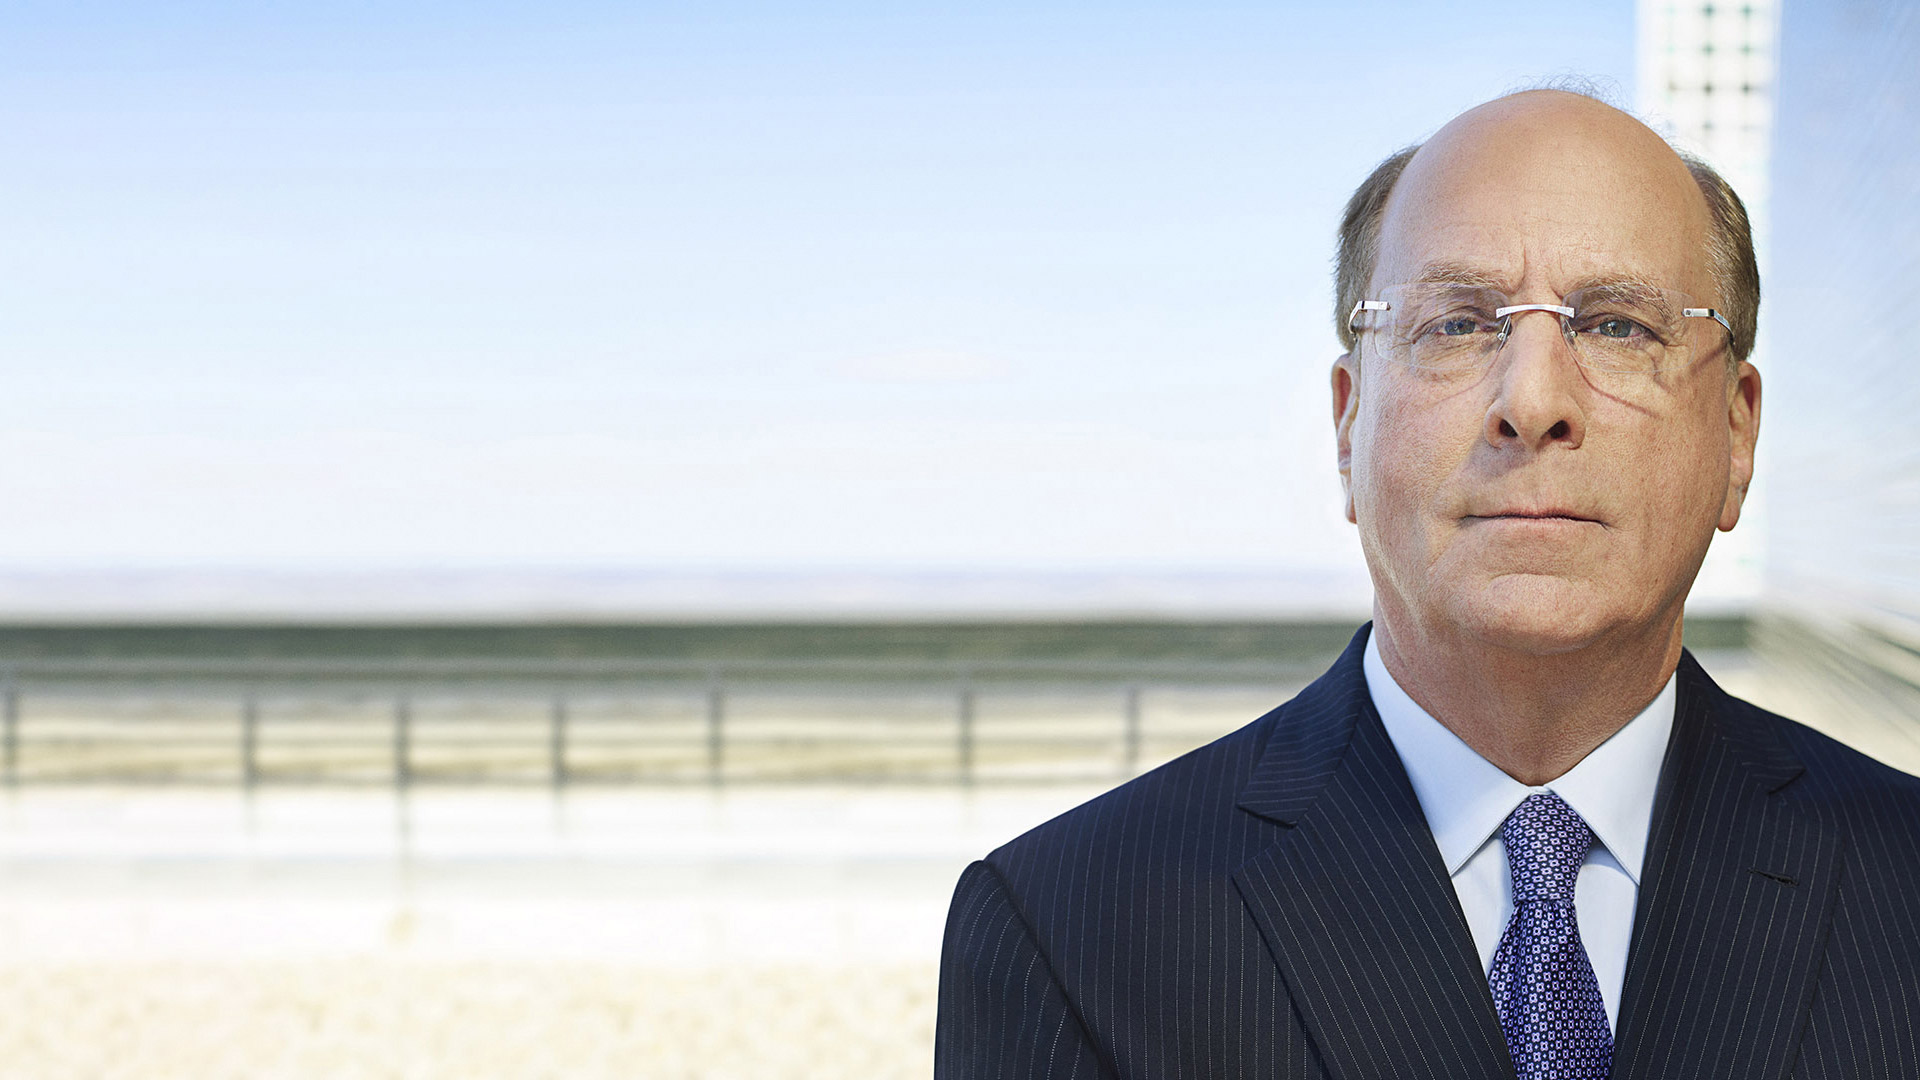 A close up shot of Larry Fink, BlackRock CEO, looking directly at the camera.